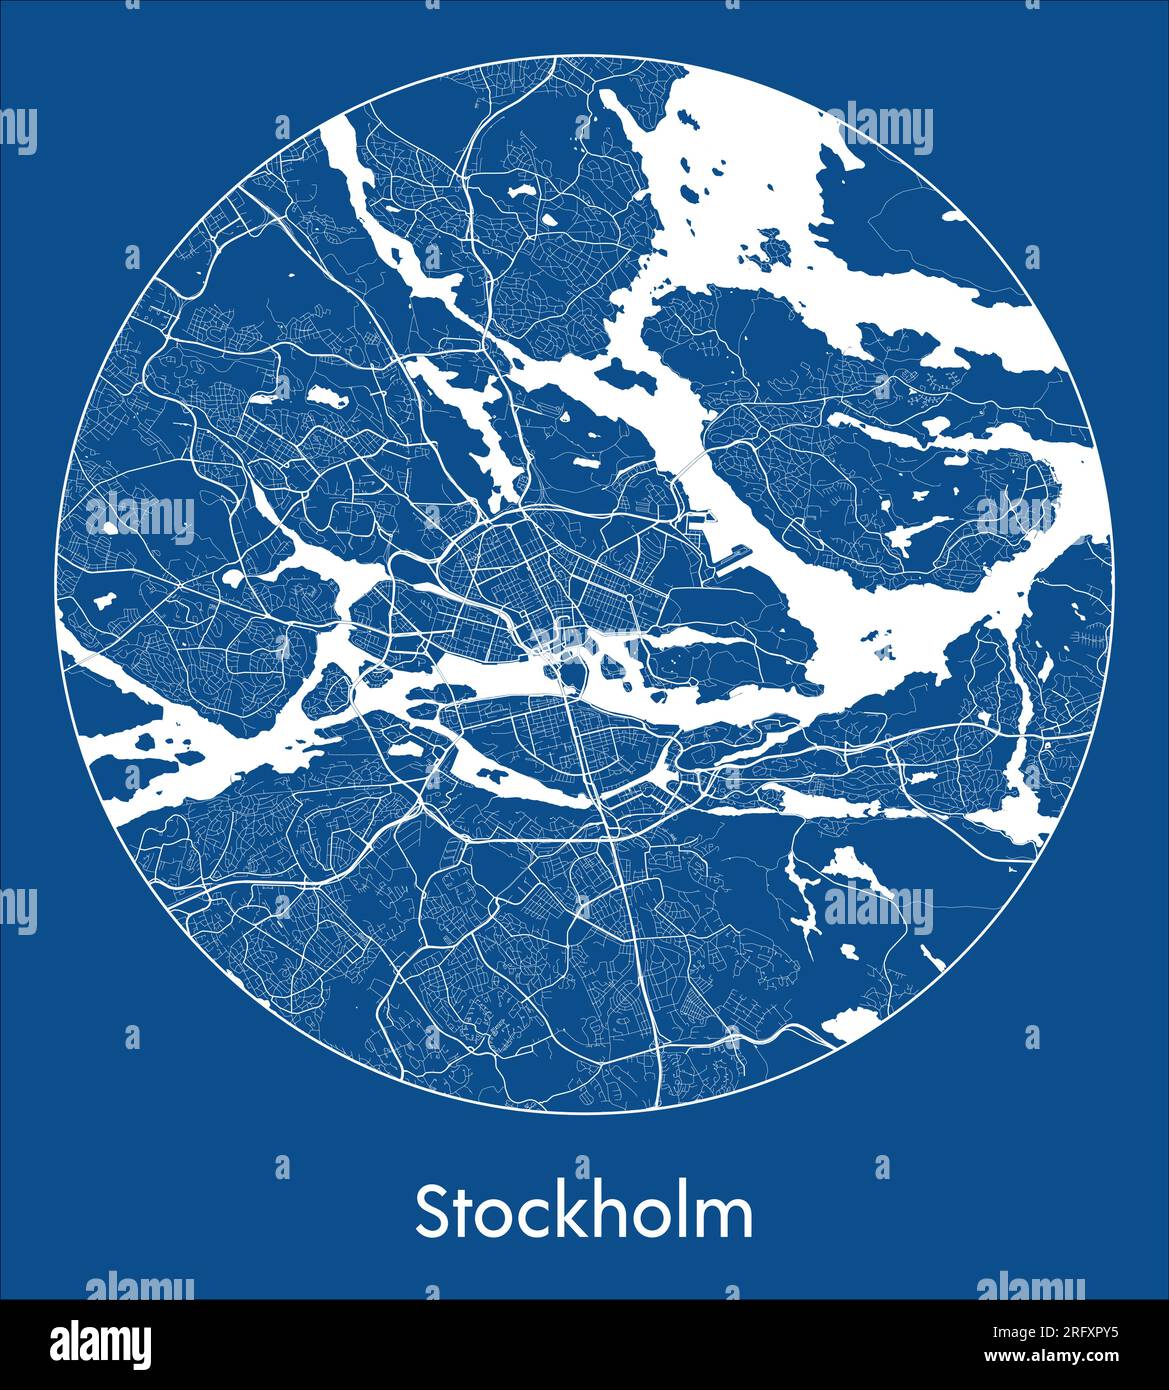 City Map Stockholm Sweden Europe blue print round Circle vector illustration Stock Vector